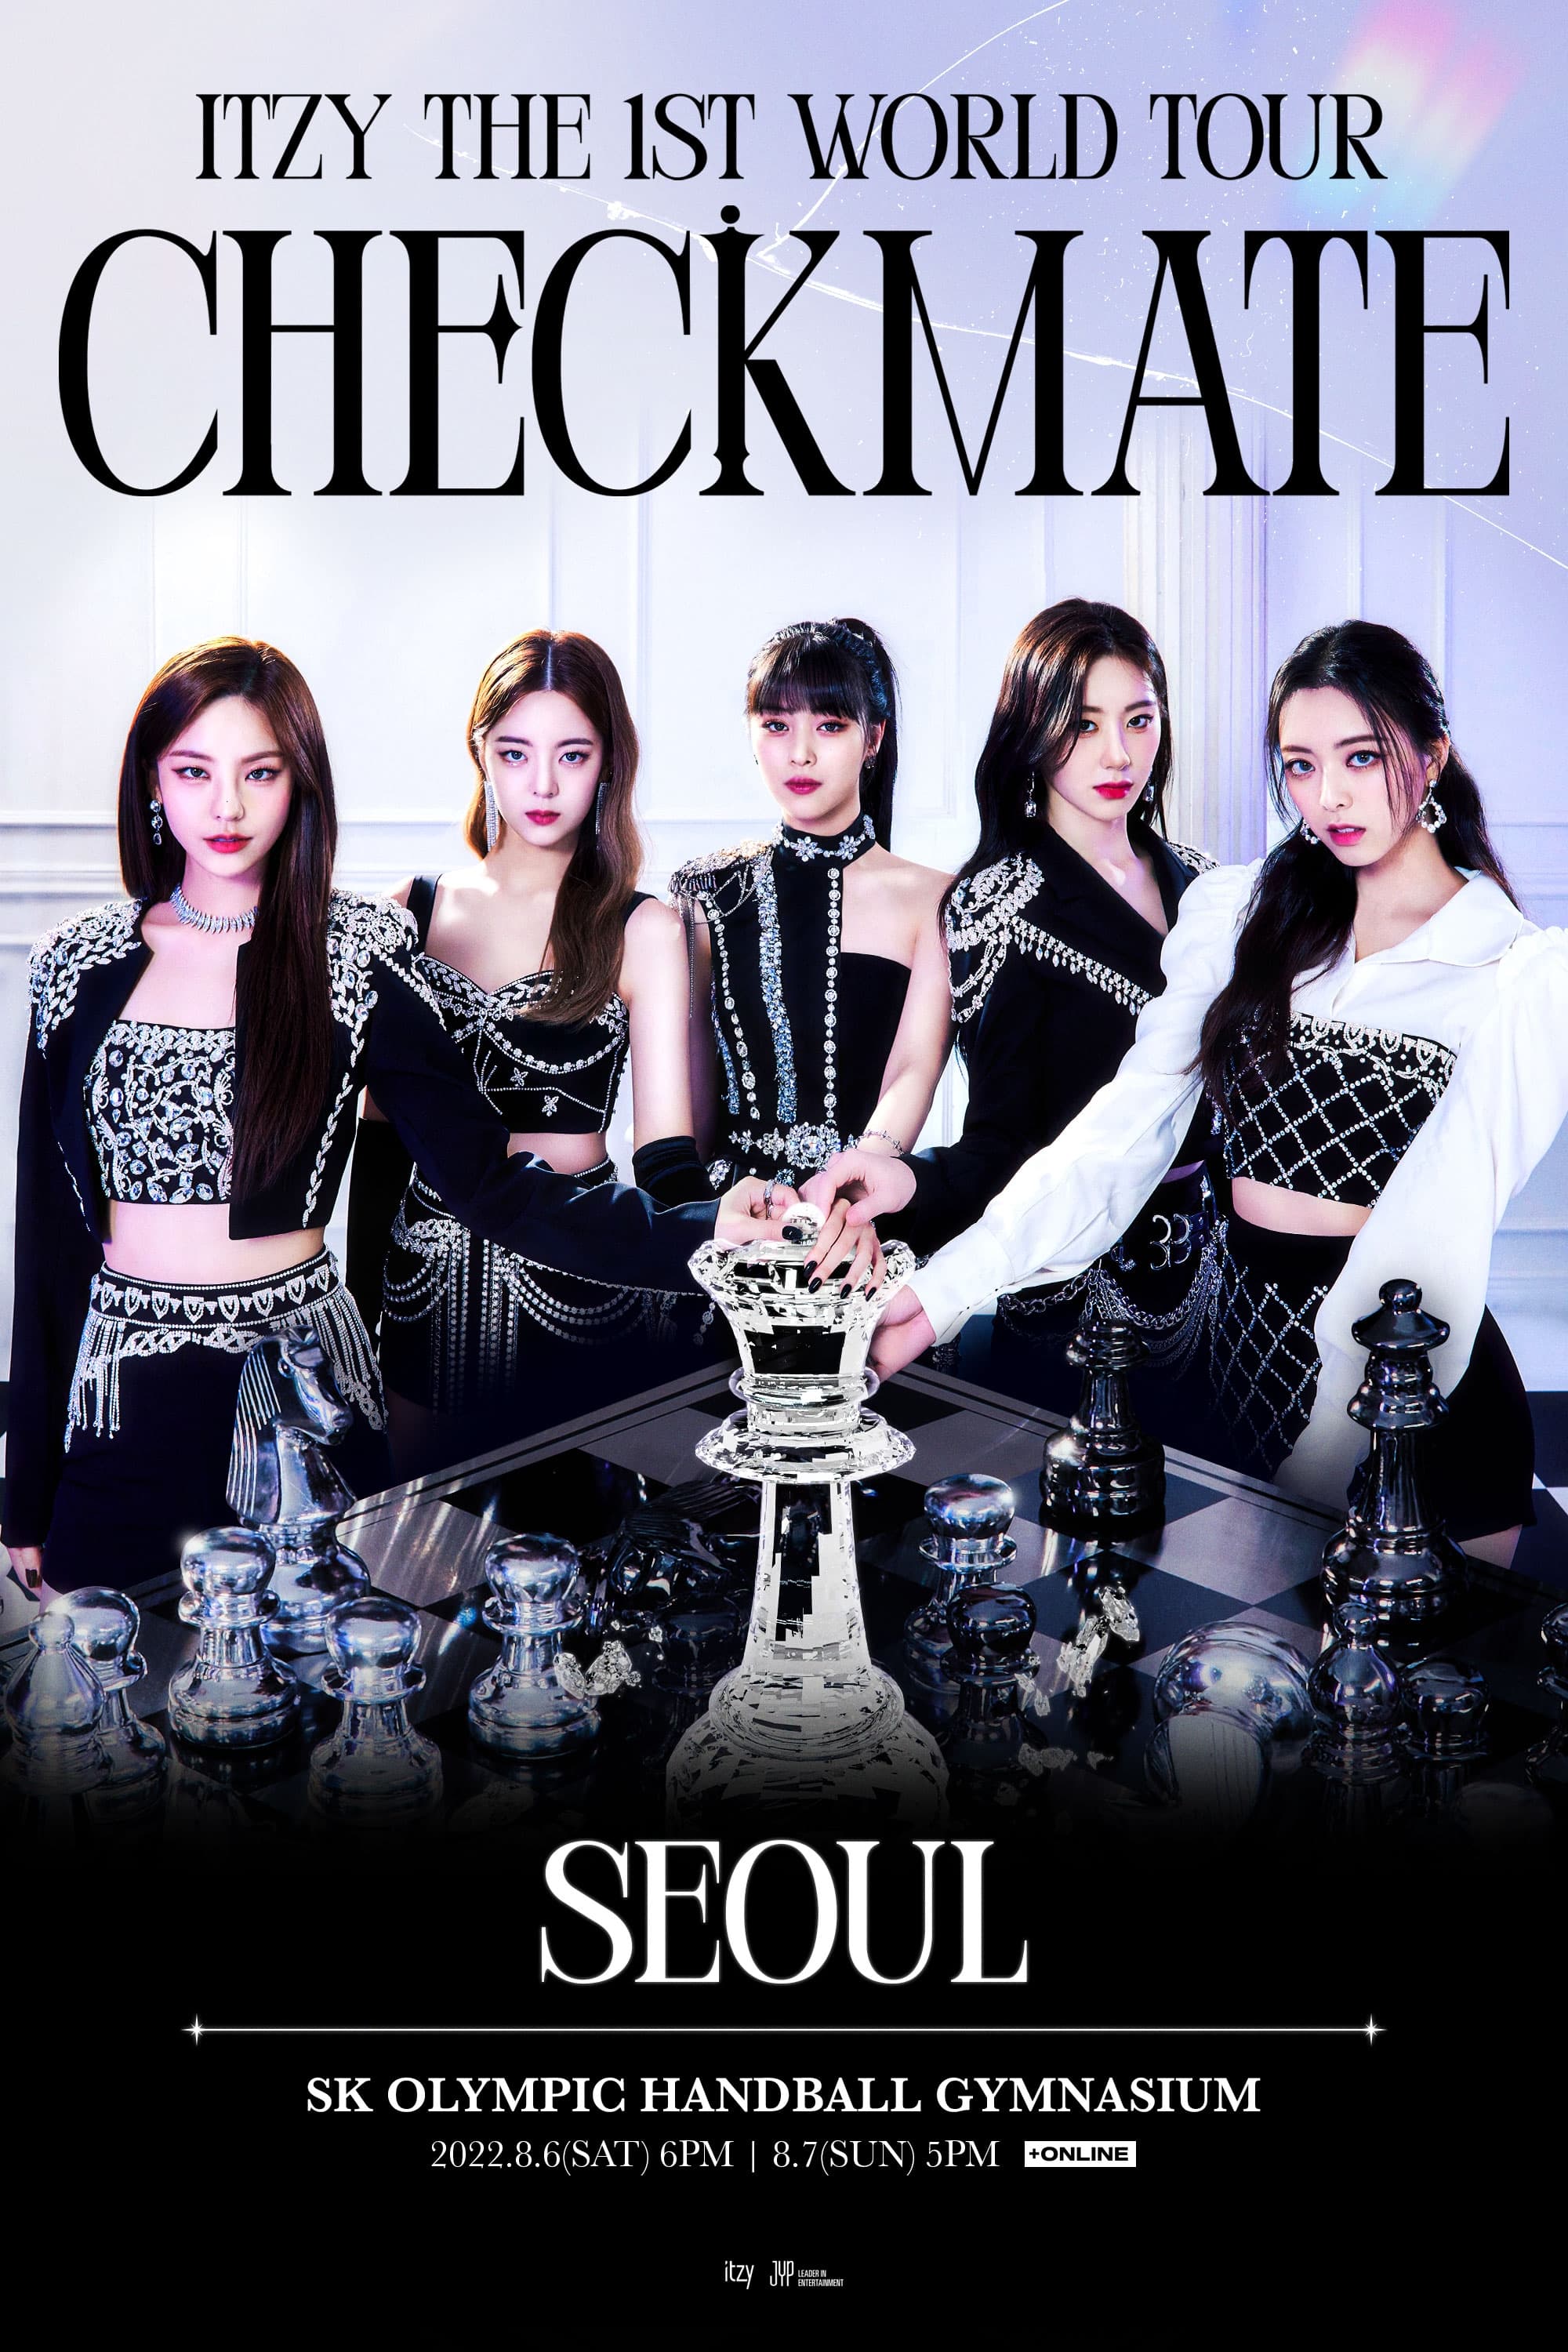 ITZY THE 1ST WORLD TOUR CHECKMATE IN SEOUL